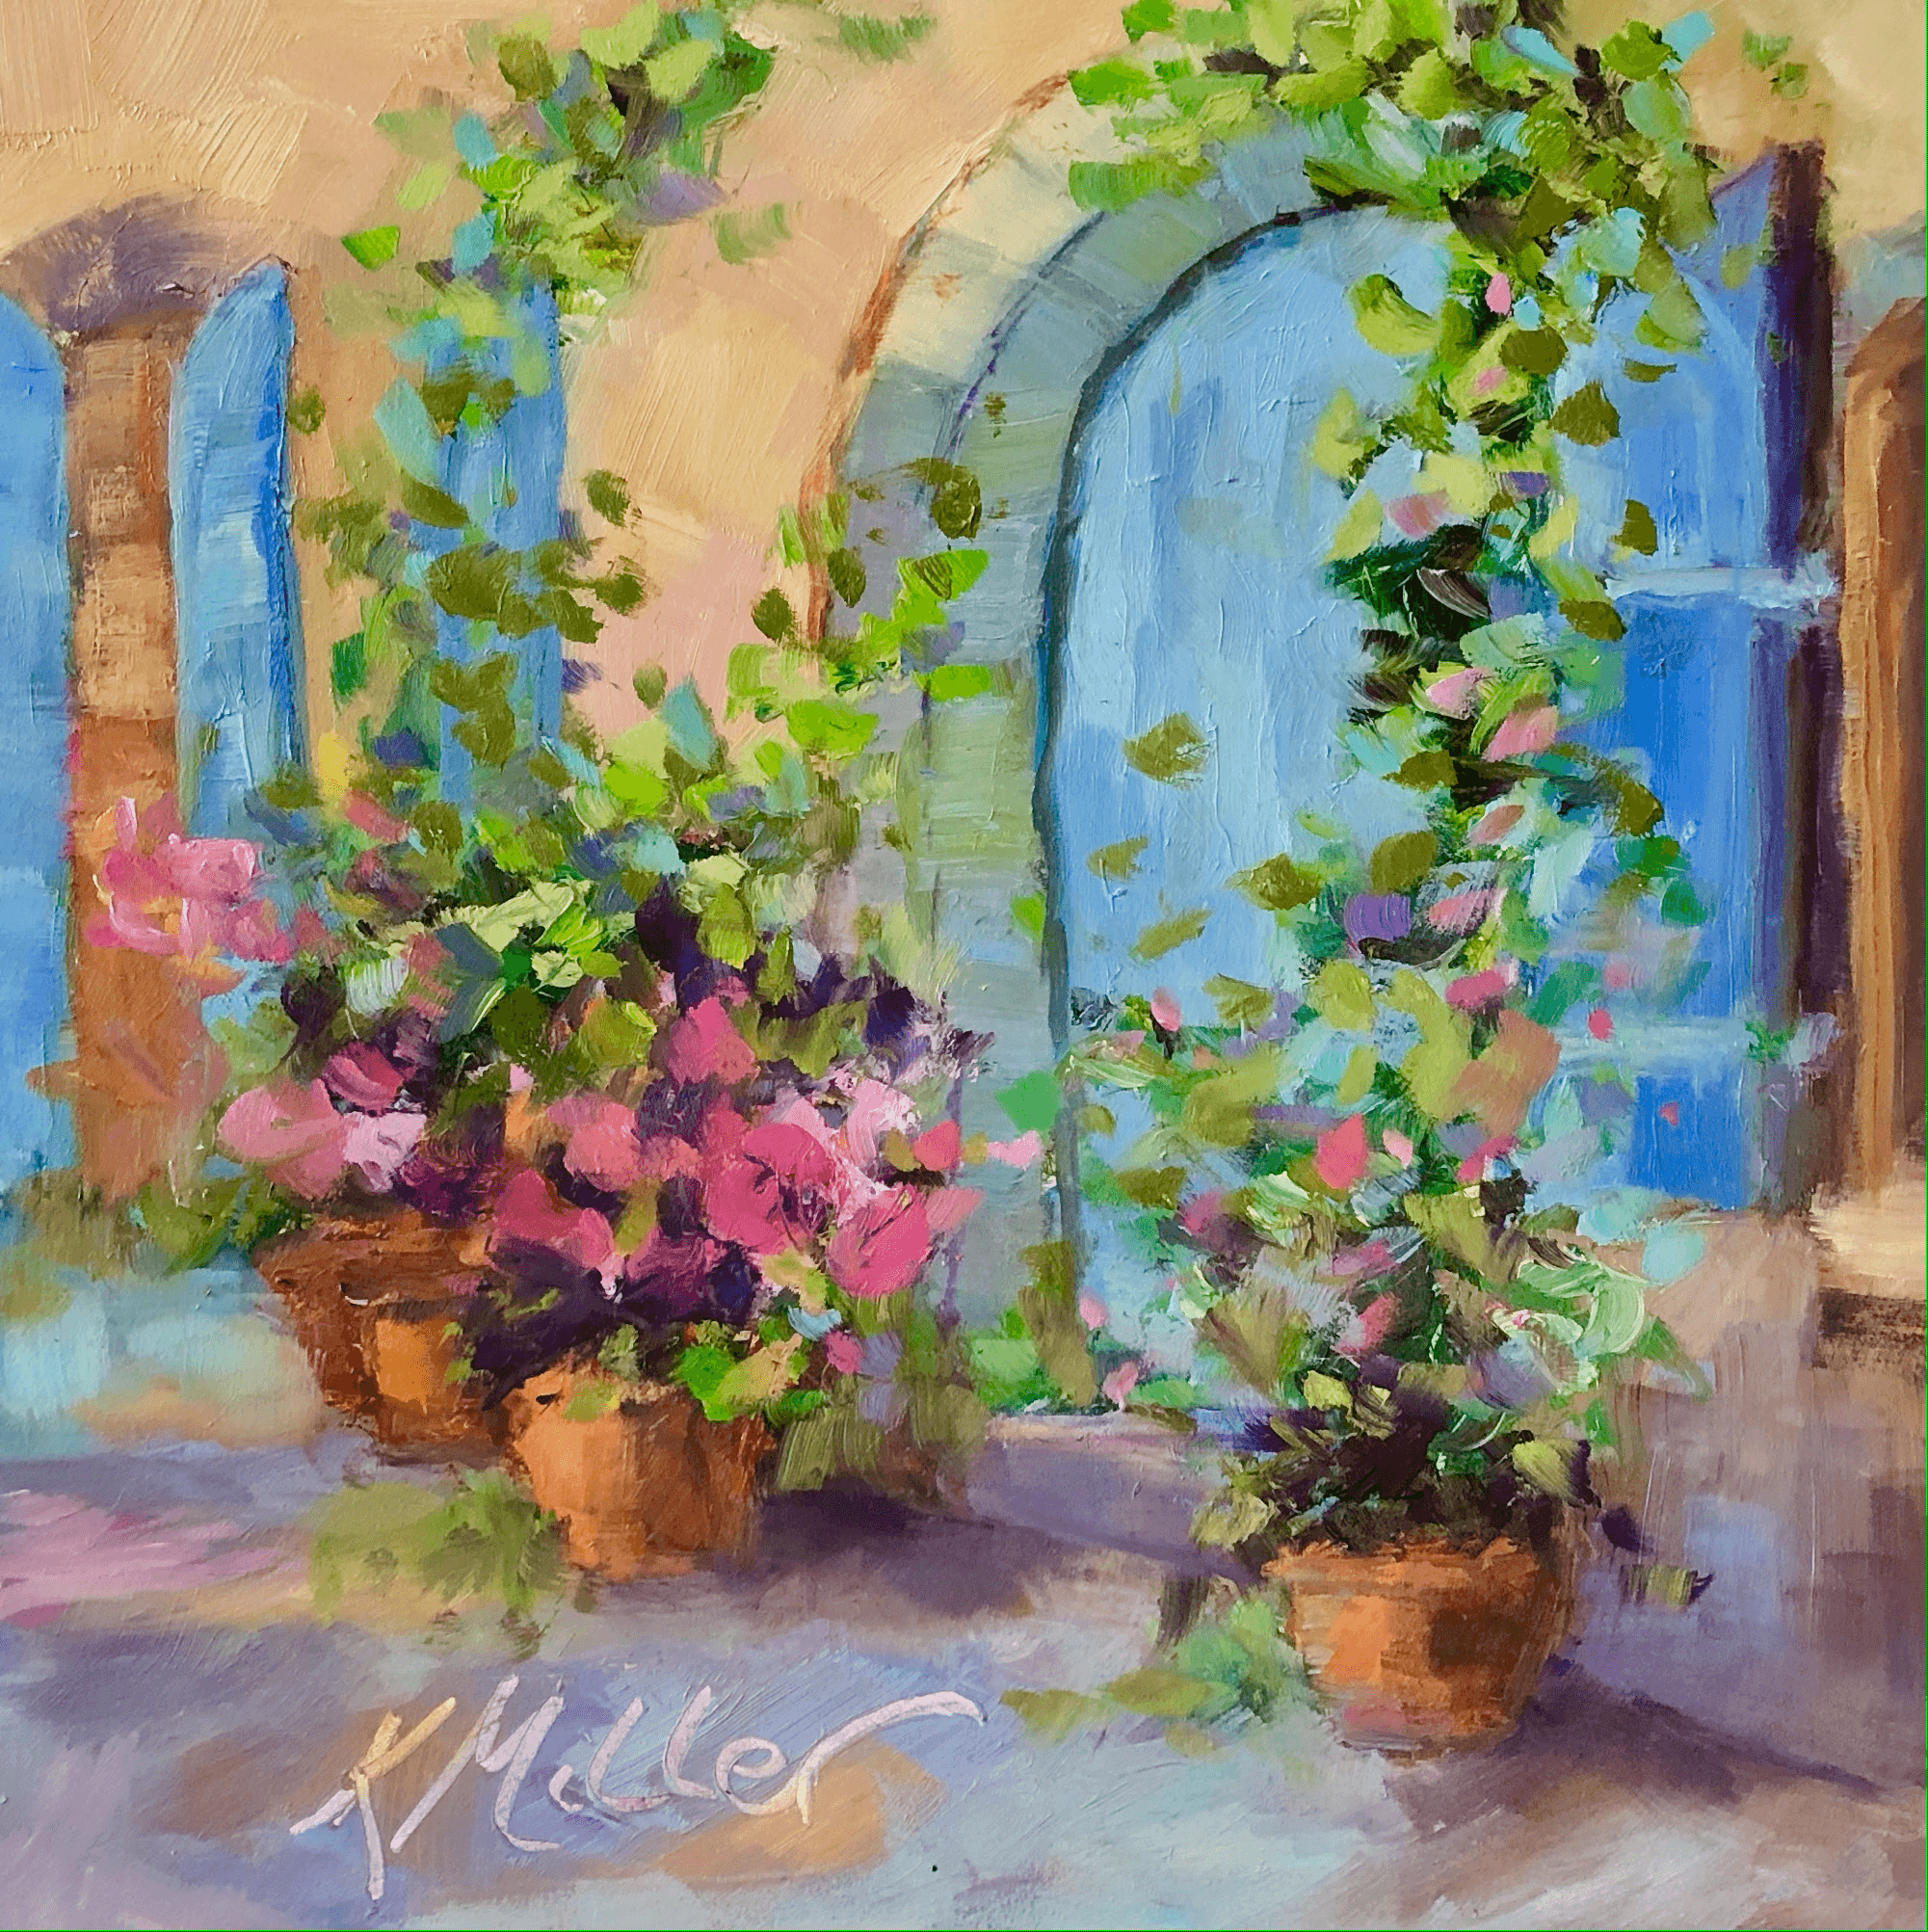 Blue Doors of Provence 8"x8" oil on museum quality Gesso panel by Kathy Miller